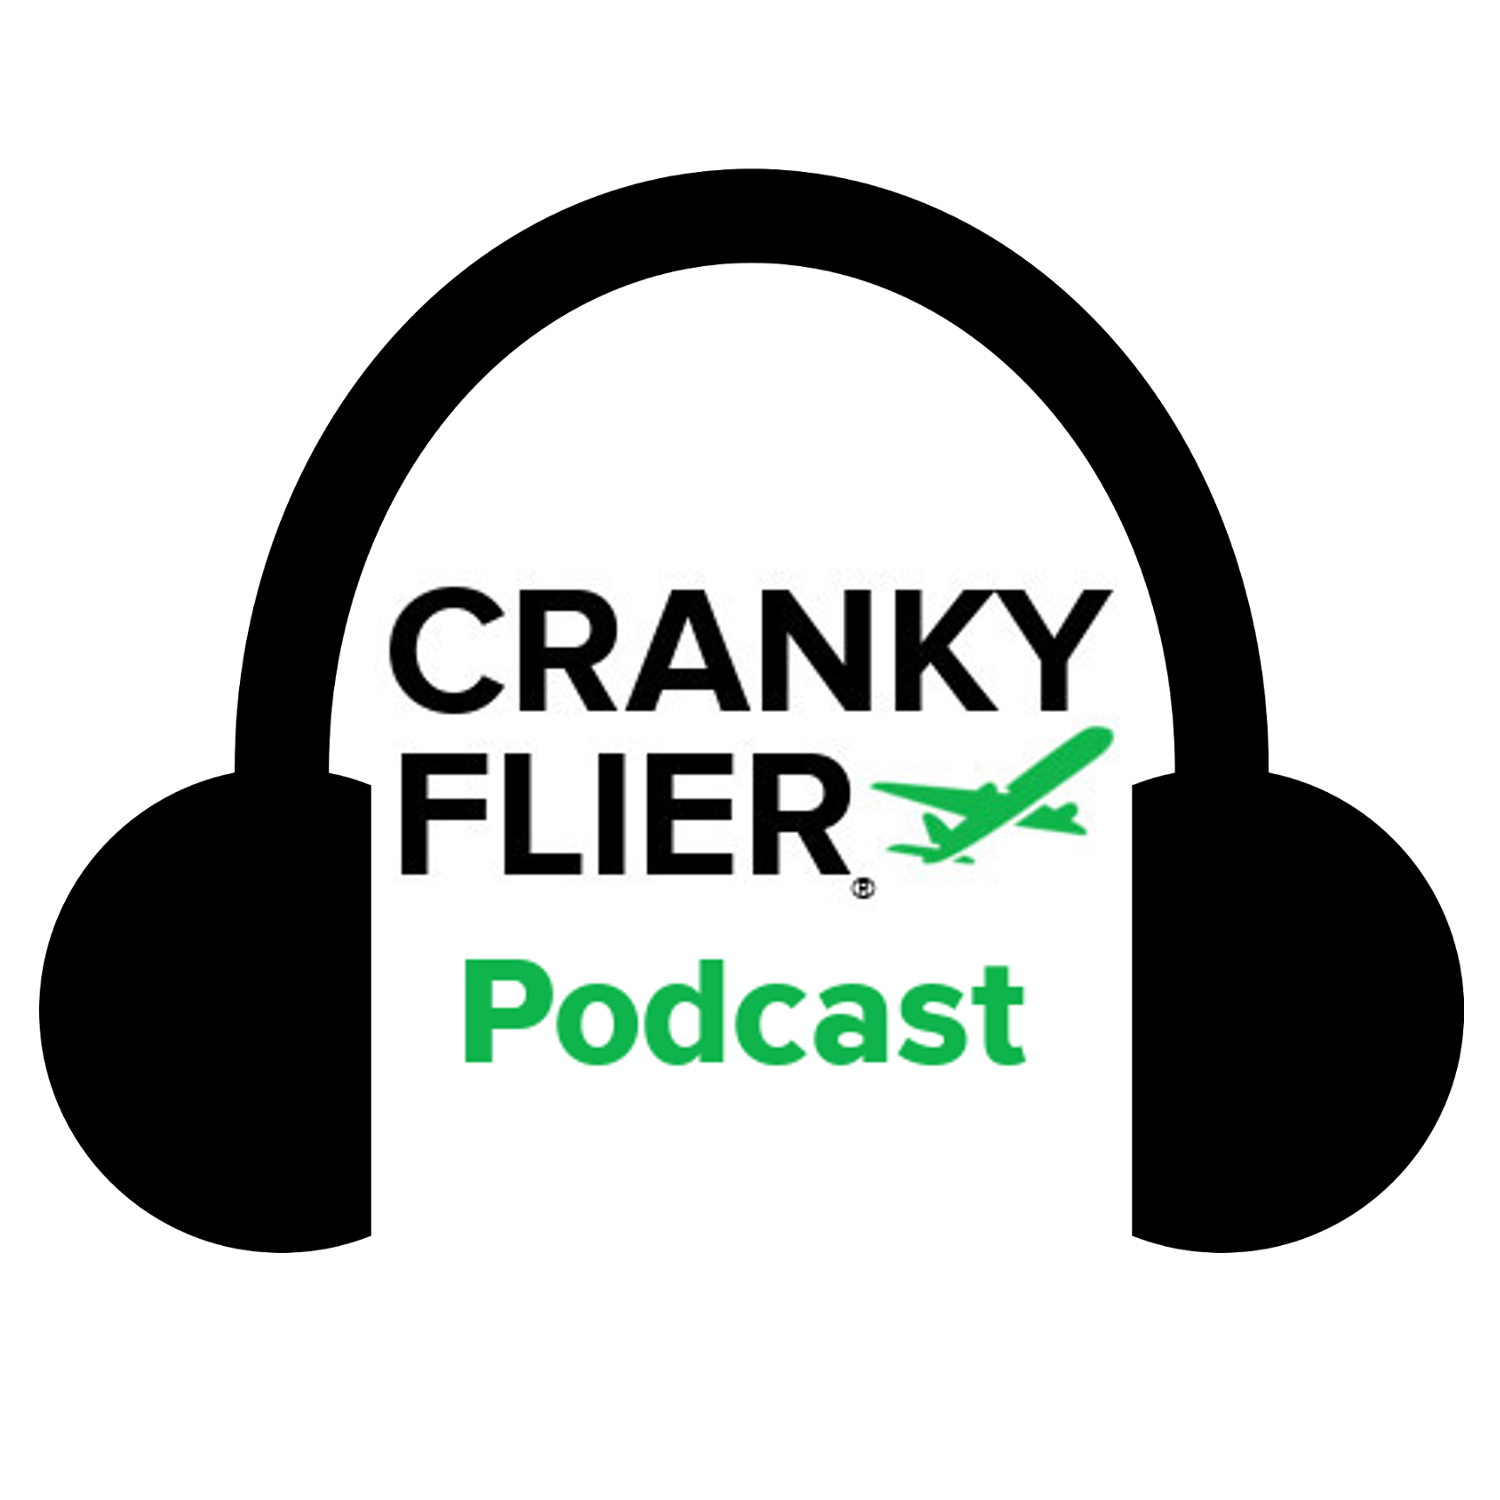 Cranky Flier Podcast #3: Why the Concert Ticket Model Won’t Work for Most Airlines